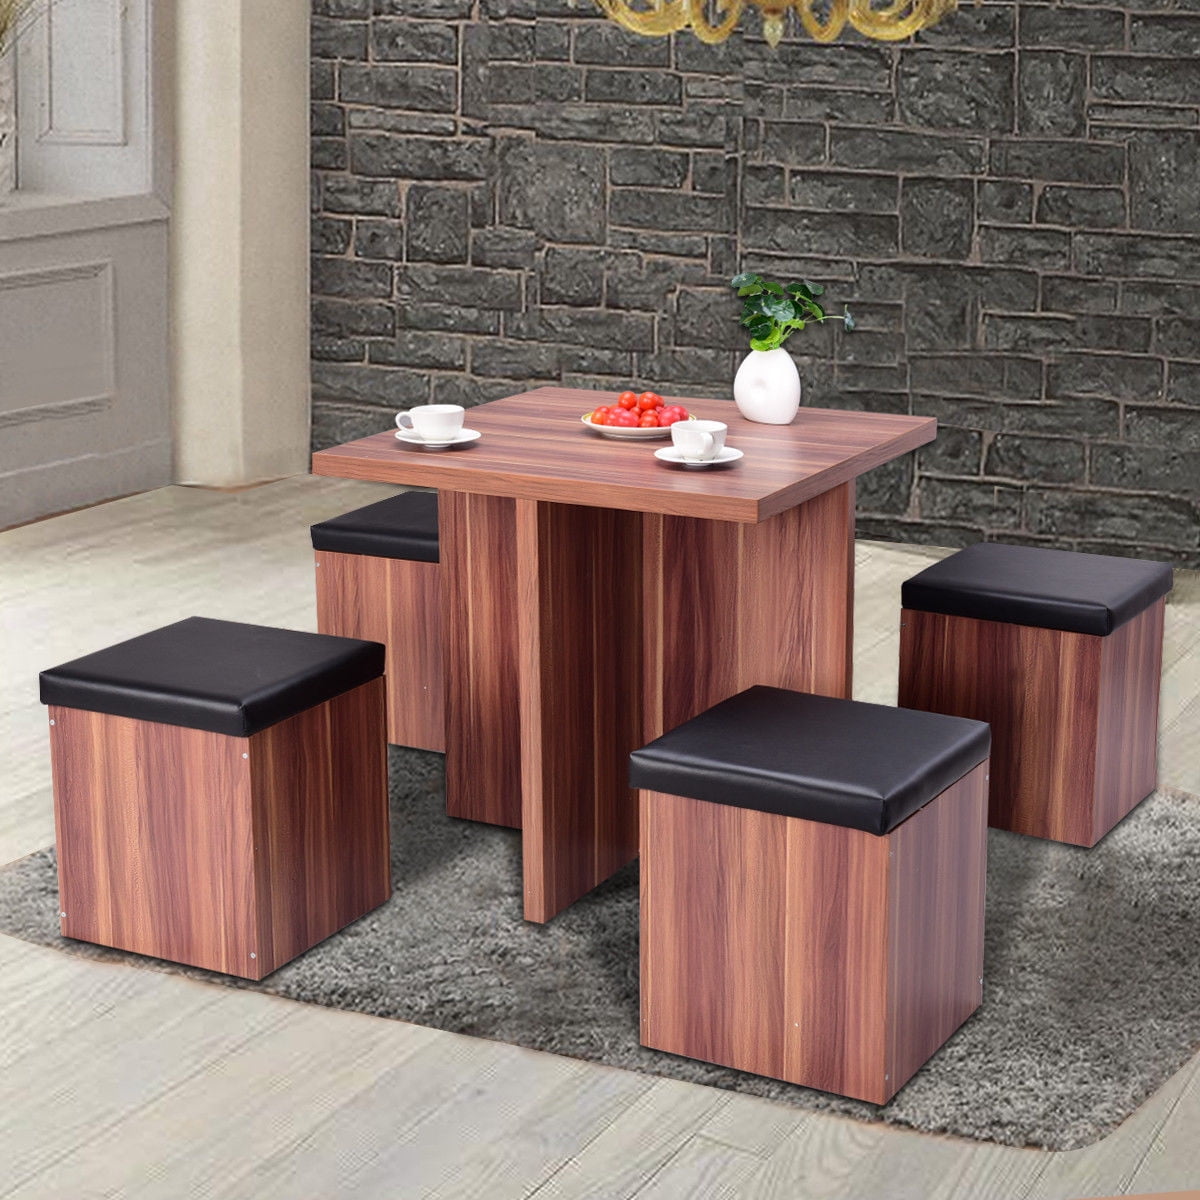 5pcs Wood Compact Dining Table Set W 4 Storage Ottoman Stools Kitchen Dinette Walmart Canada